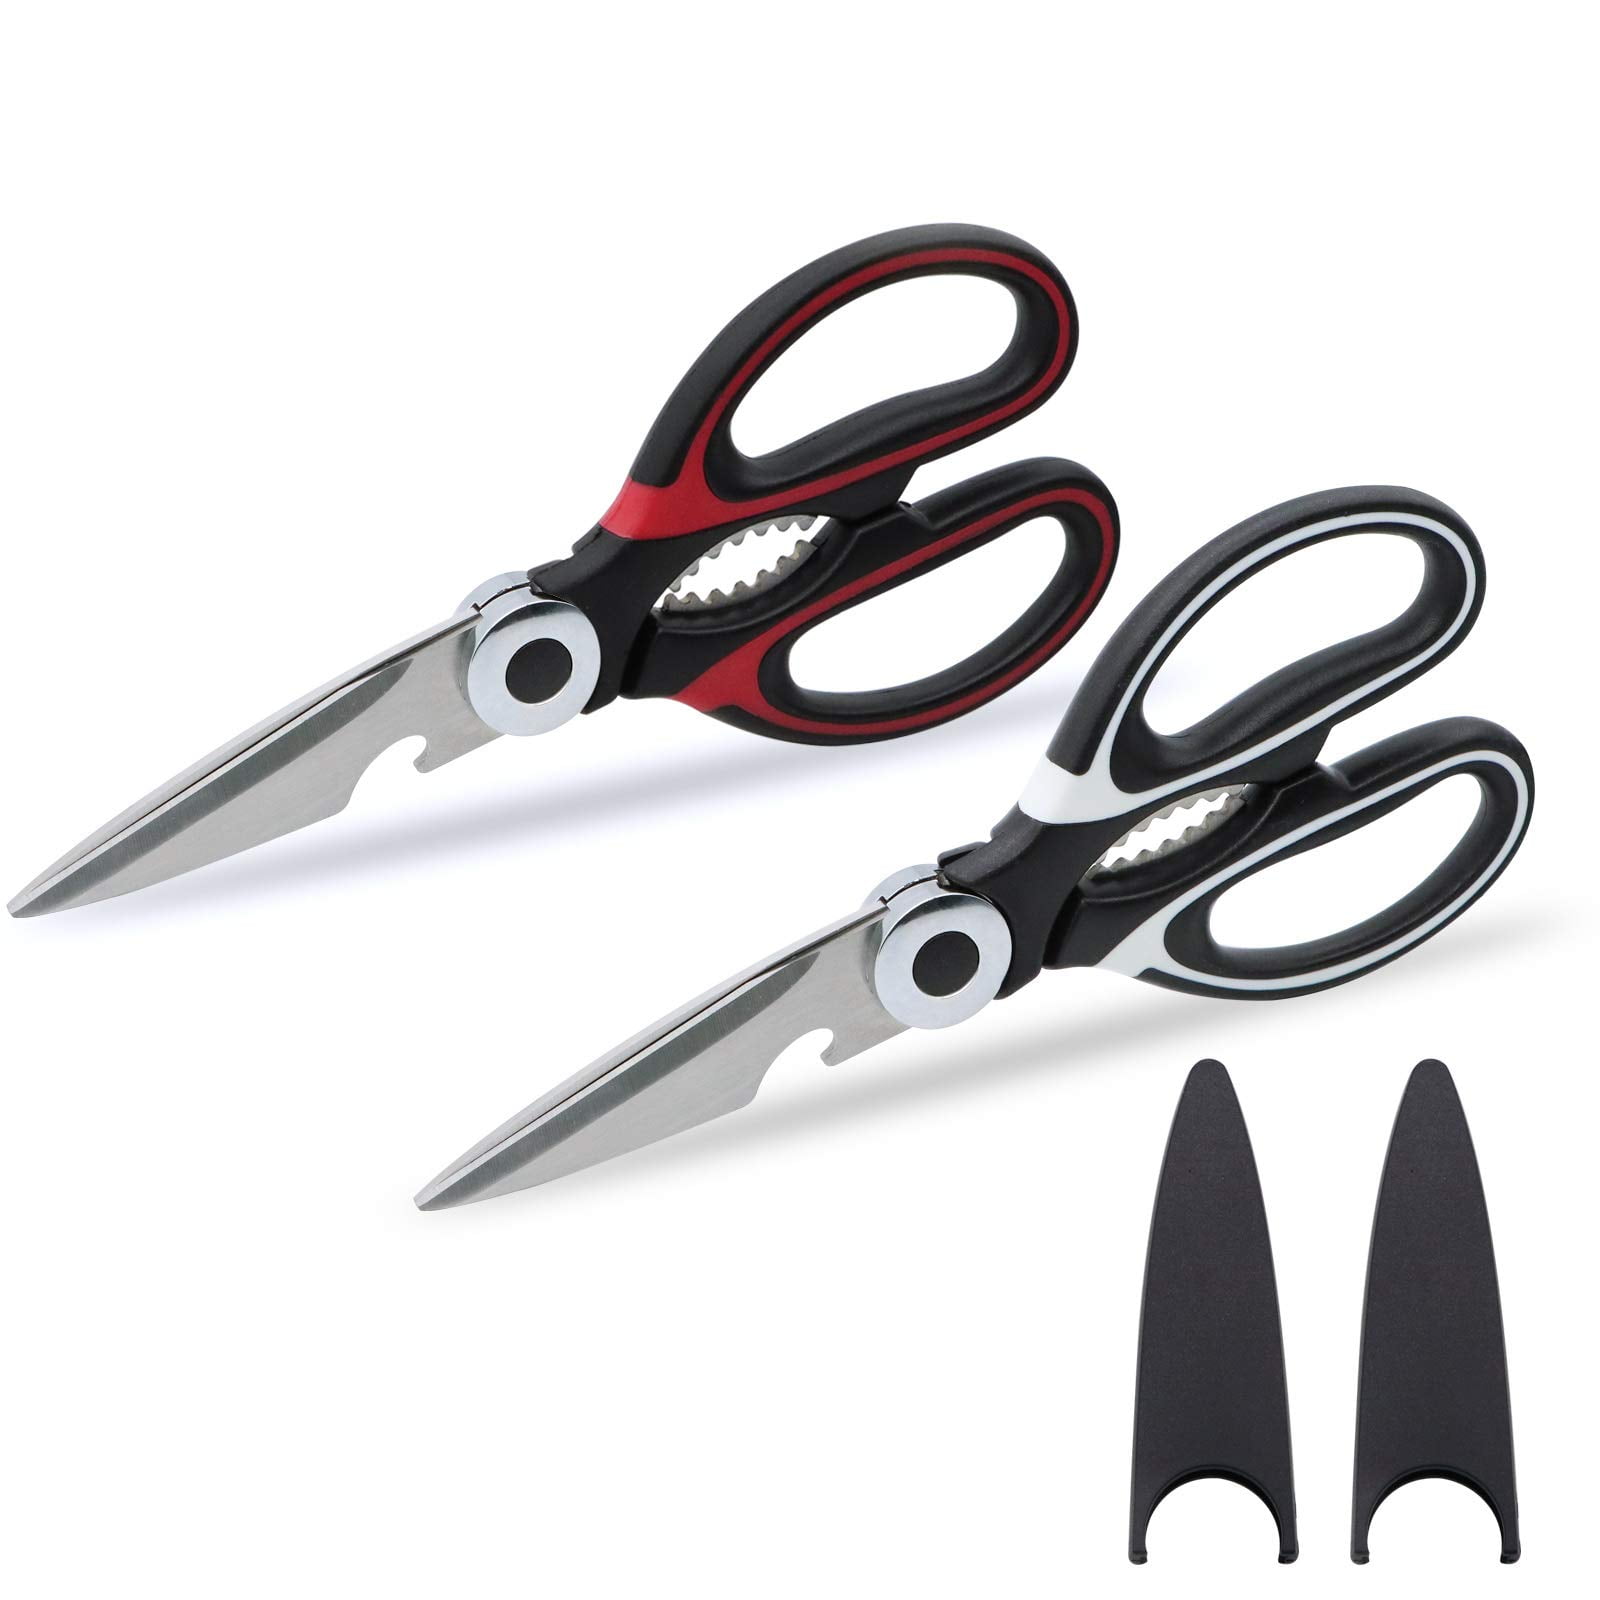 Professional Kitchen Scissors Cooking Scissors Made From Stainless Steel  Household Necessity All-purpose Scissors Sharp Blades(1pc)